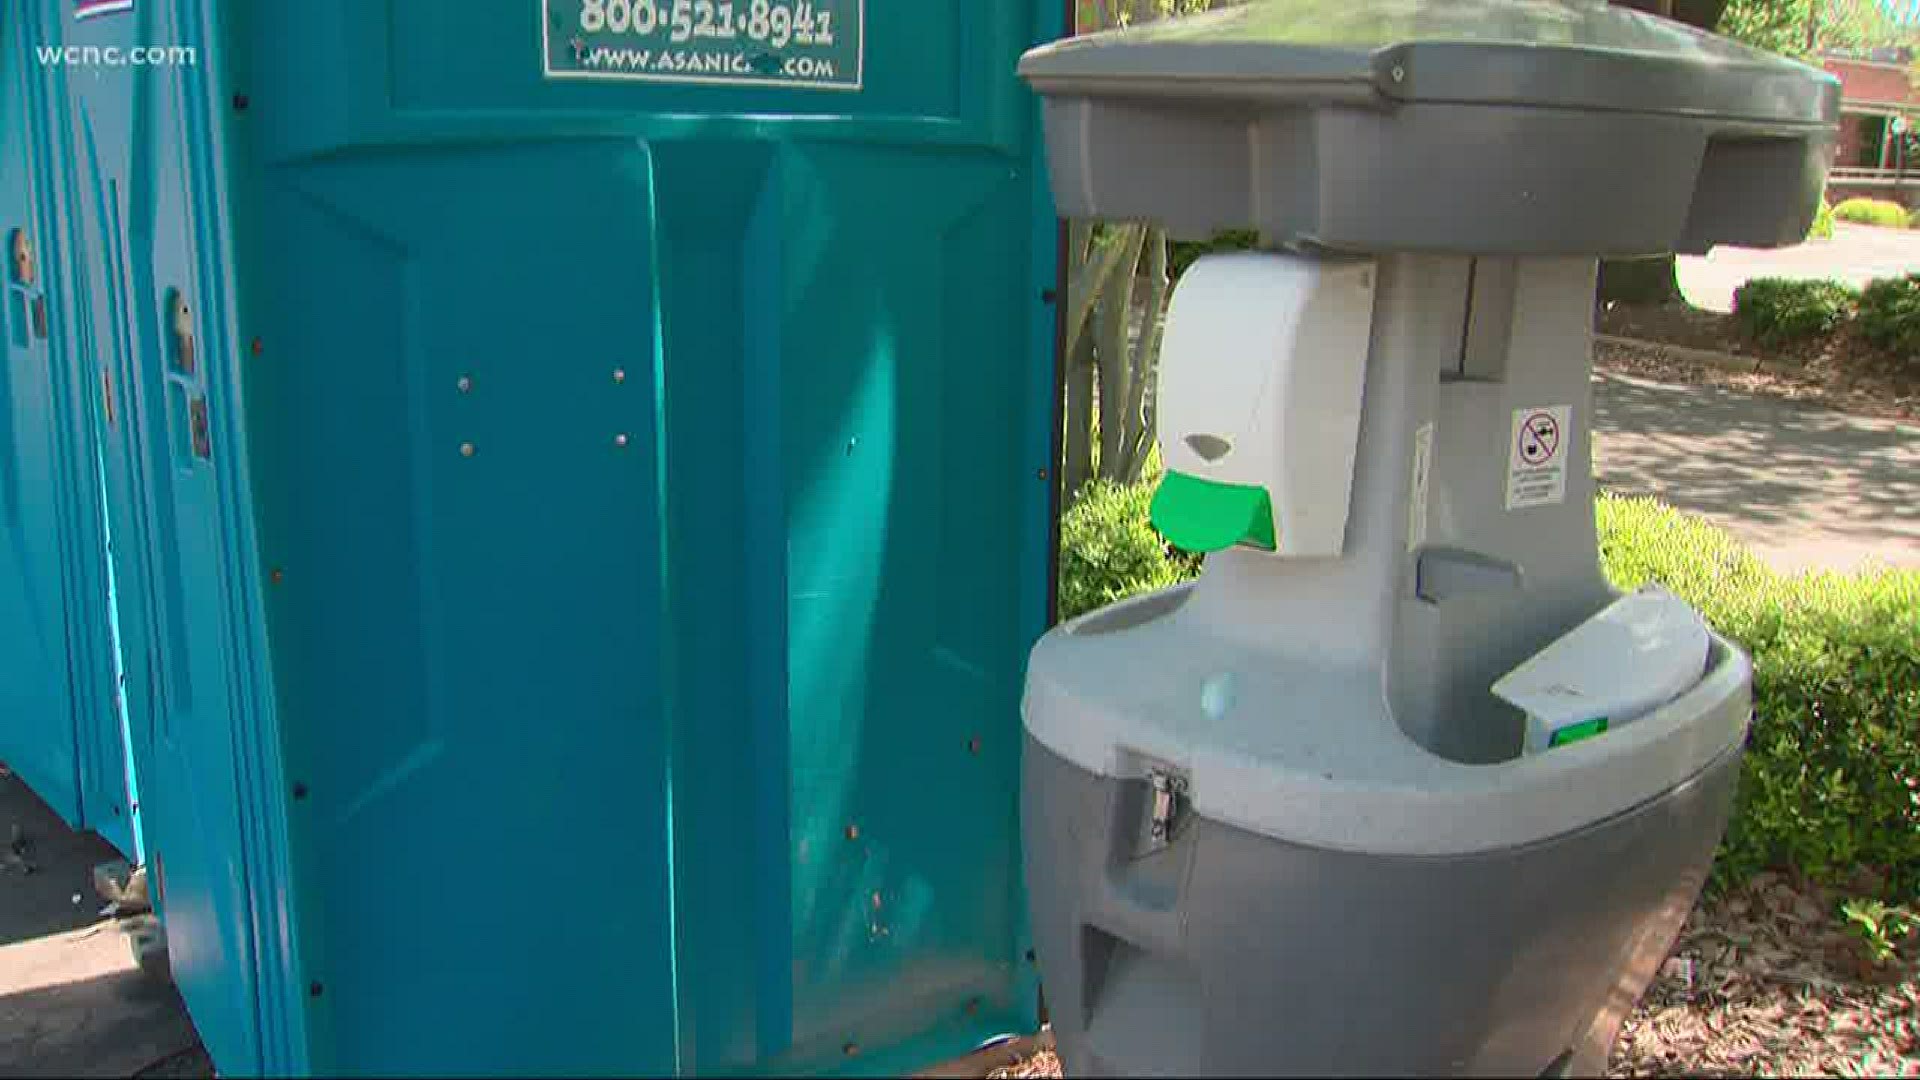 Mecklenburg County has installed six temporary washrooms near known homeless encampments in uptown Charlotte. There are plans to install more stations.